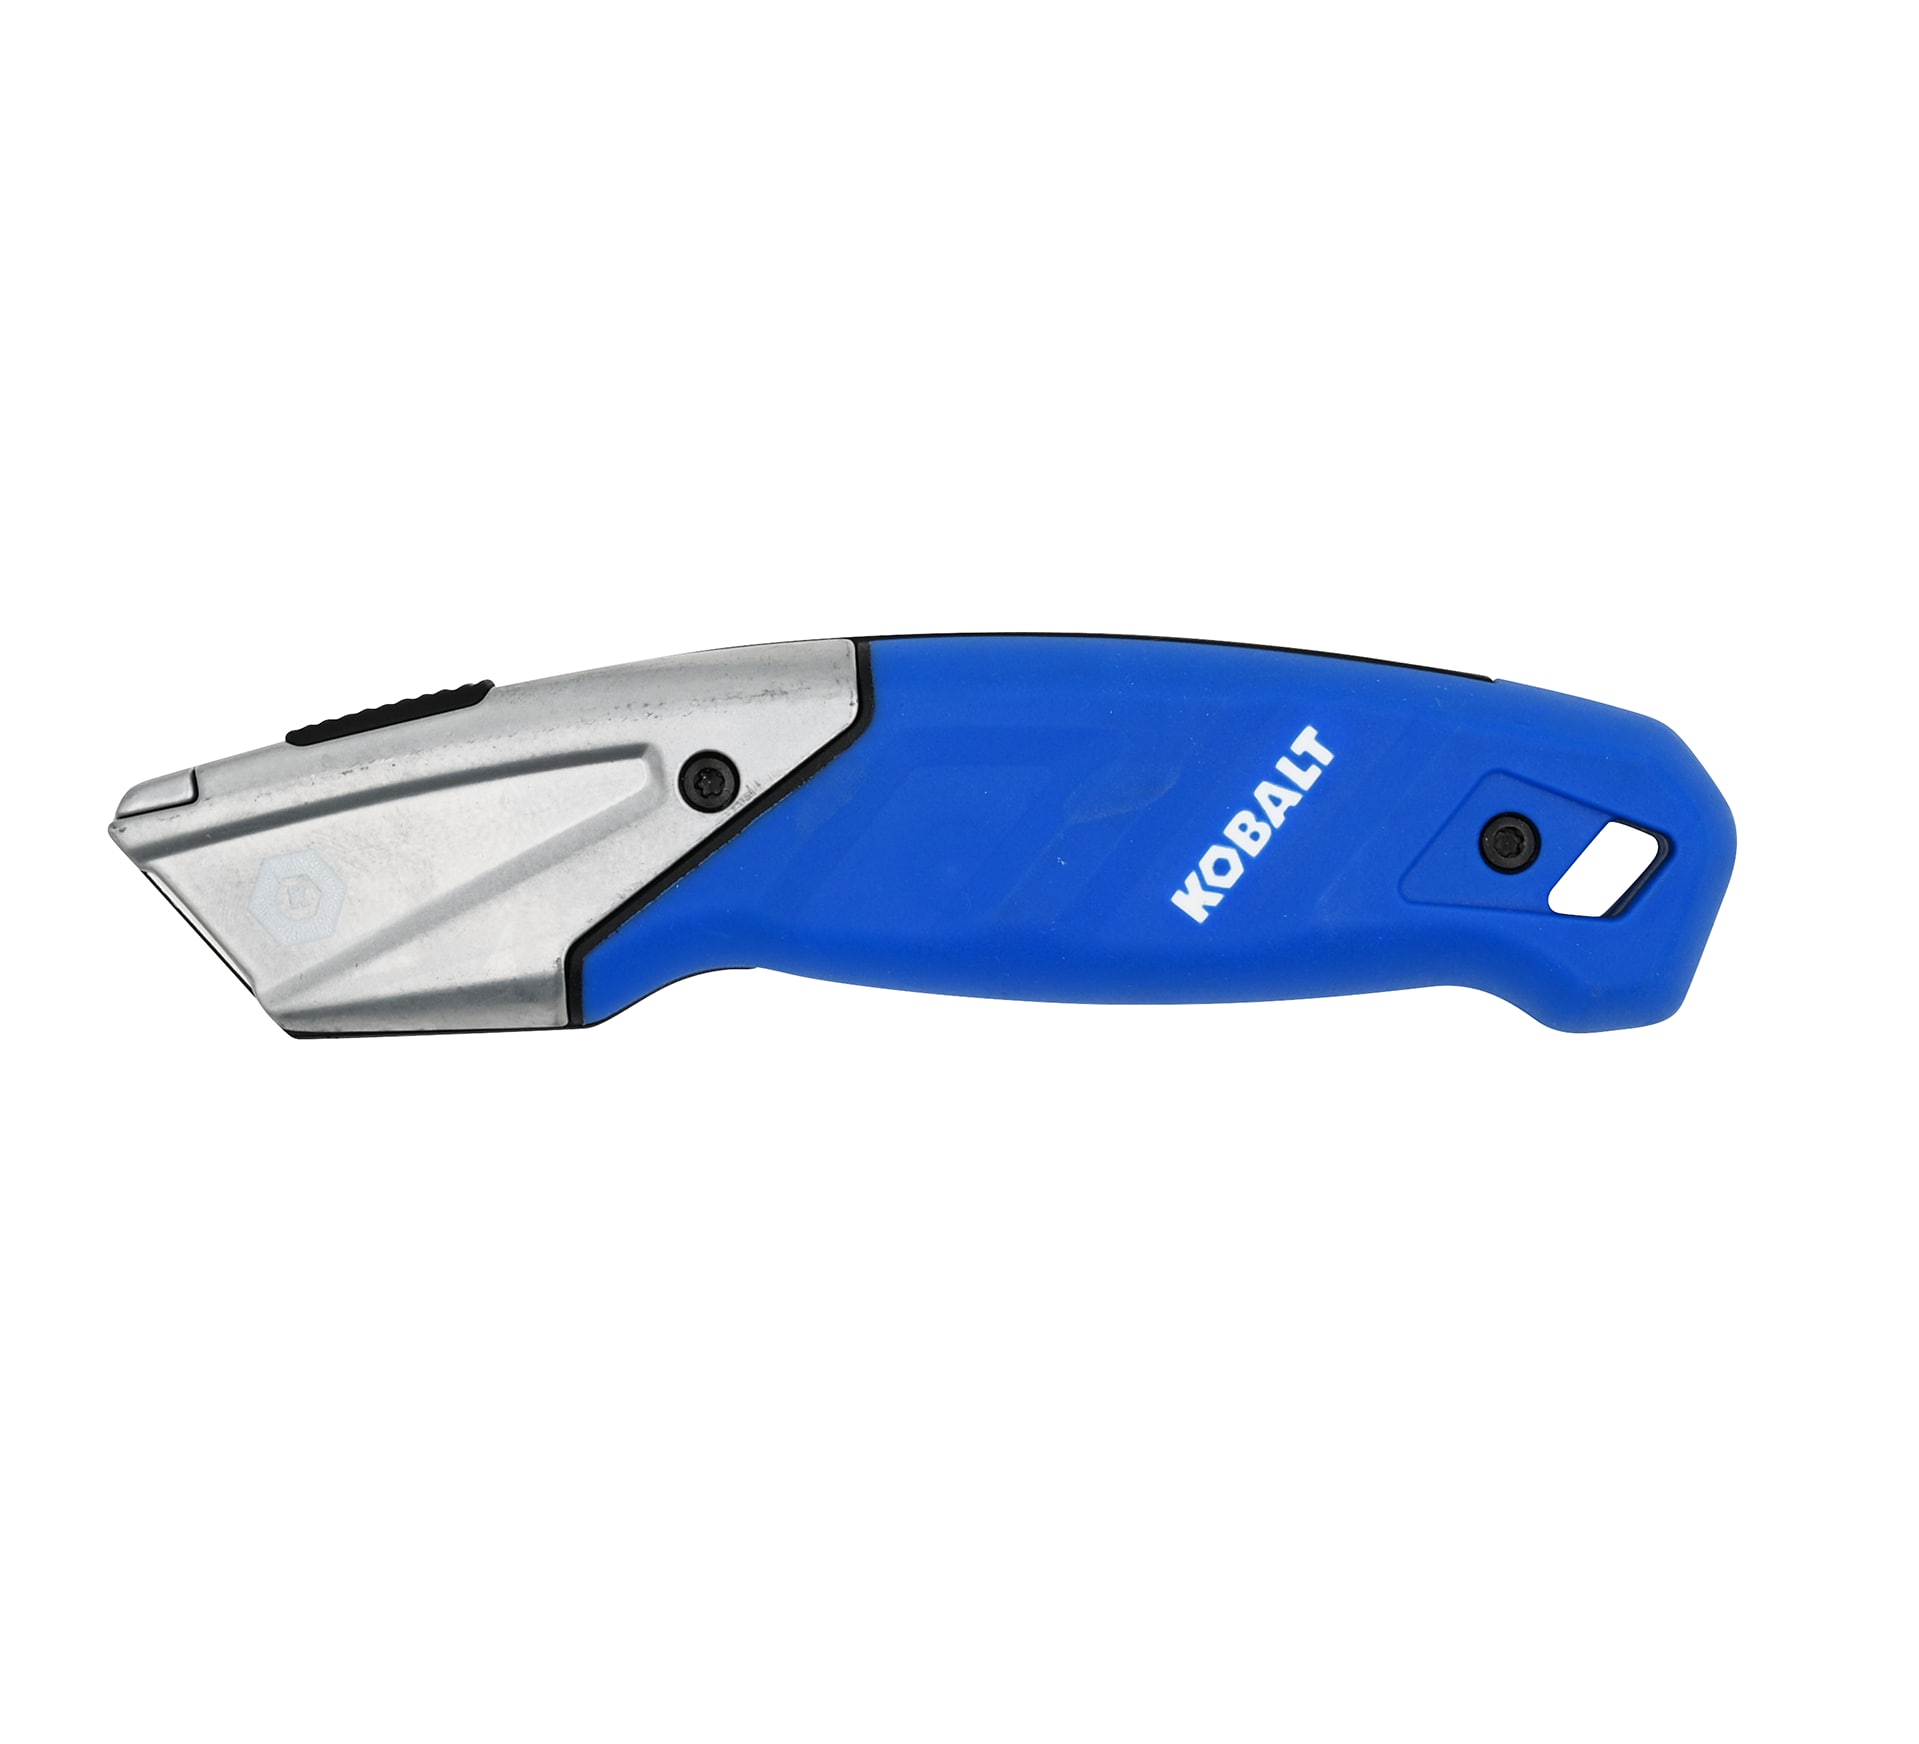 Kobalt Heavy Duty Fixed 3/4-in 3-Blade Utility Knife with On Tool Blade  Storage in the Utility Knives department at